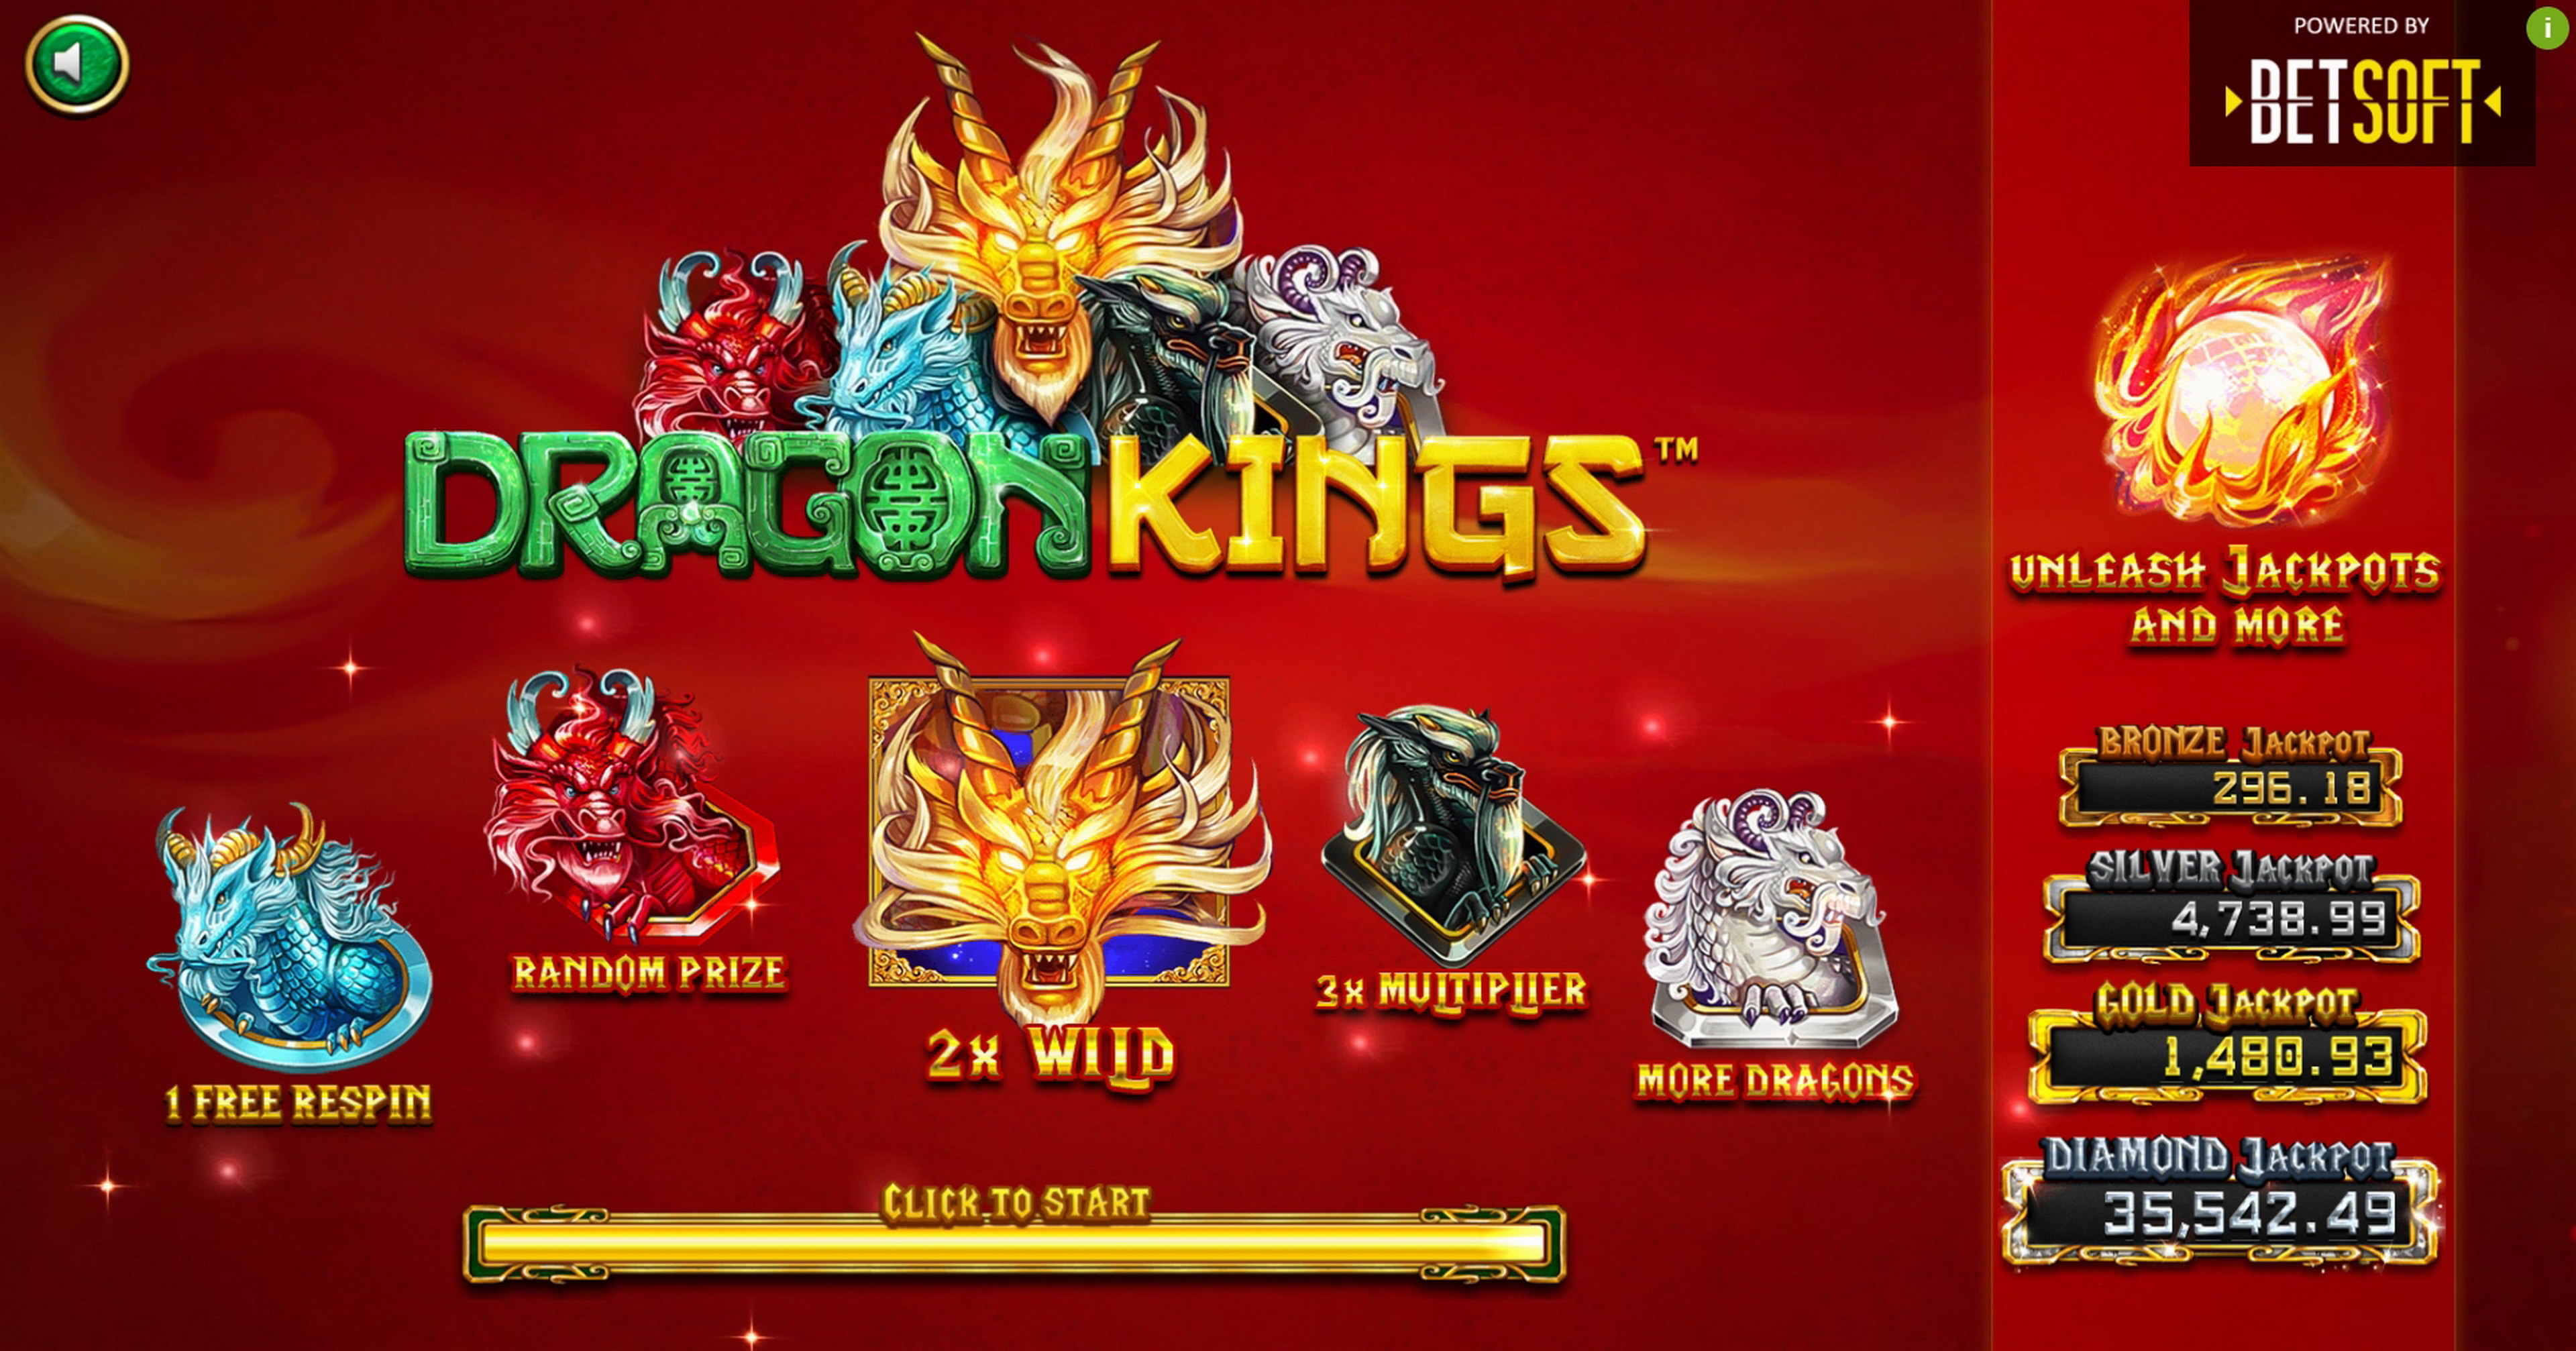 Play Dragon Kings Free Casino Slot Game by Betsoft